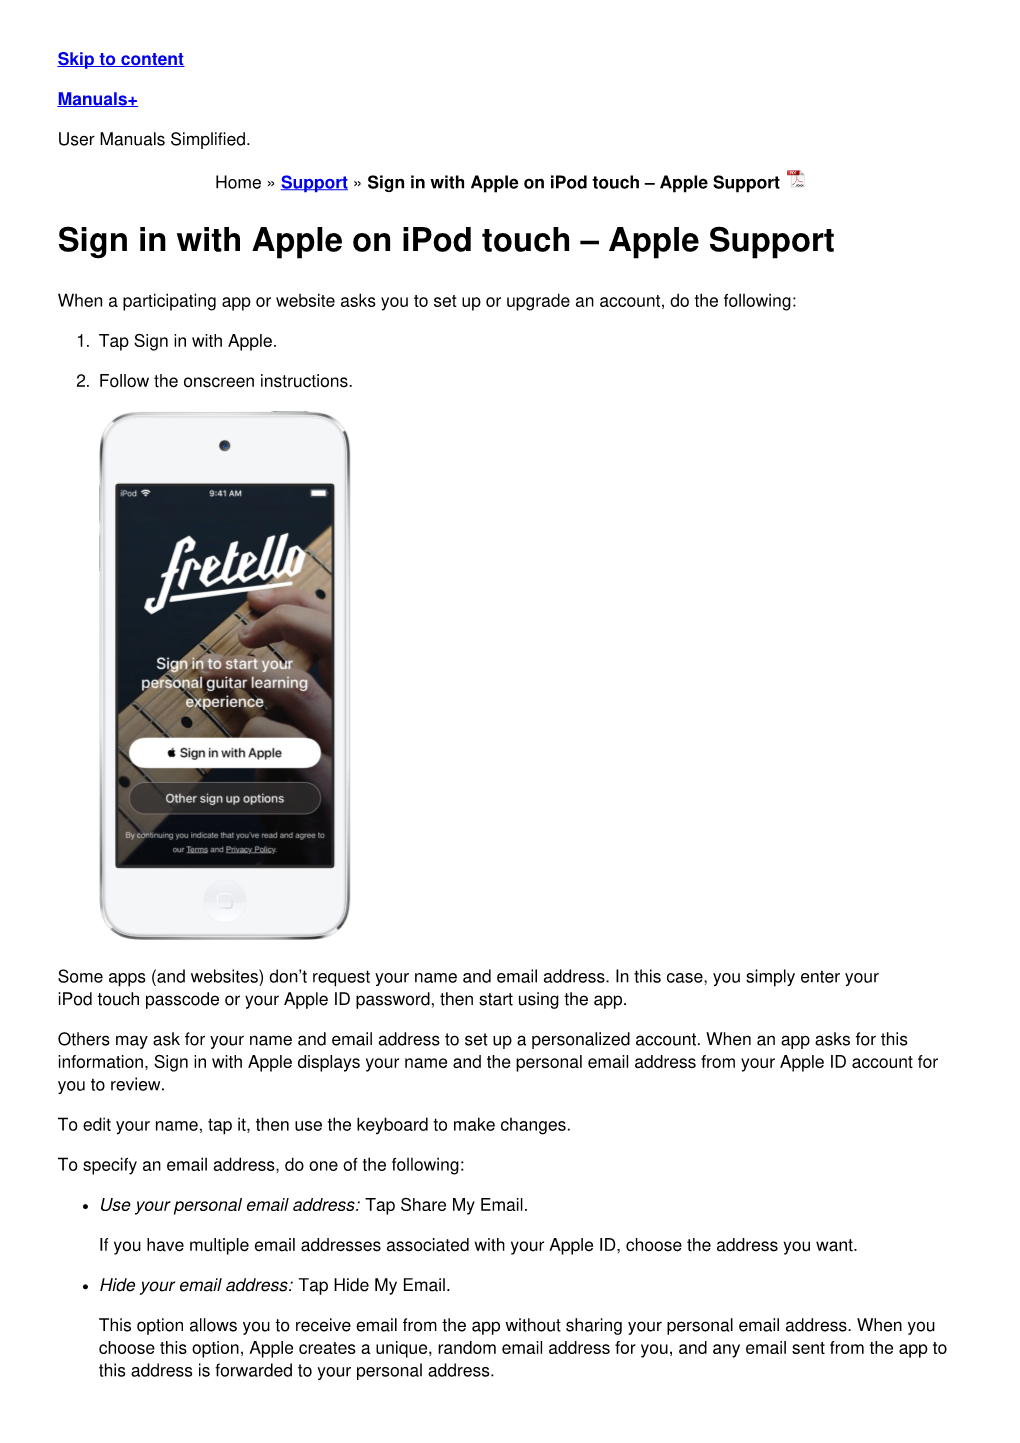 Sign in with Apple on Ipod Touch – Apple Support